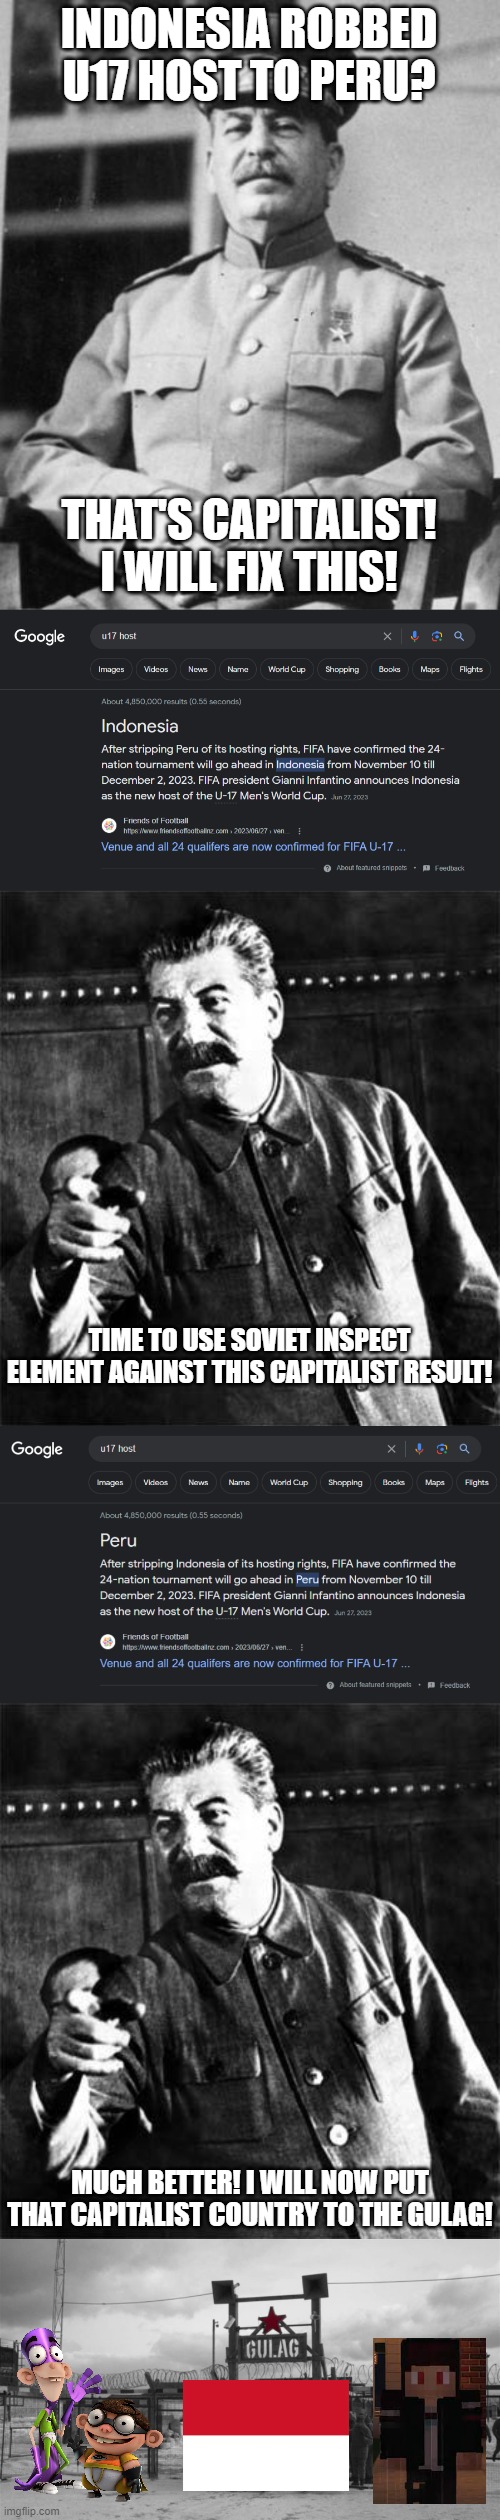 Matias told me to make this (freestream) | INDONESIA ROBBED U17 HOST TO PERU? THAT'S CAPITALIST! I WILL FIX THIS! TIME TO USE SOVIET INSPECT ELEMENT AGAINST THIS CAPITALIST RESULT! MUCH BETTER! I WILL NOW PUT THAT CAPITALIST COUNTRY TO THE GULAG! | image tagged in stalin,gulag | made w/ Imgflip meme maker